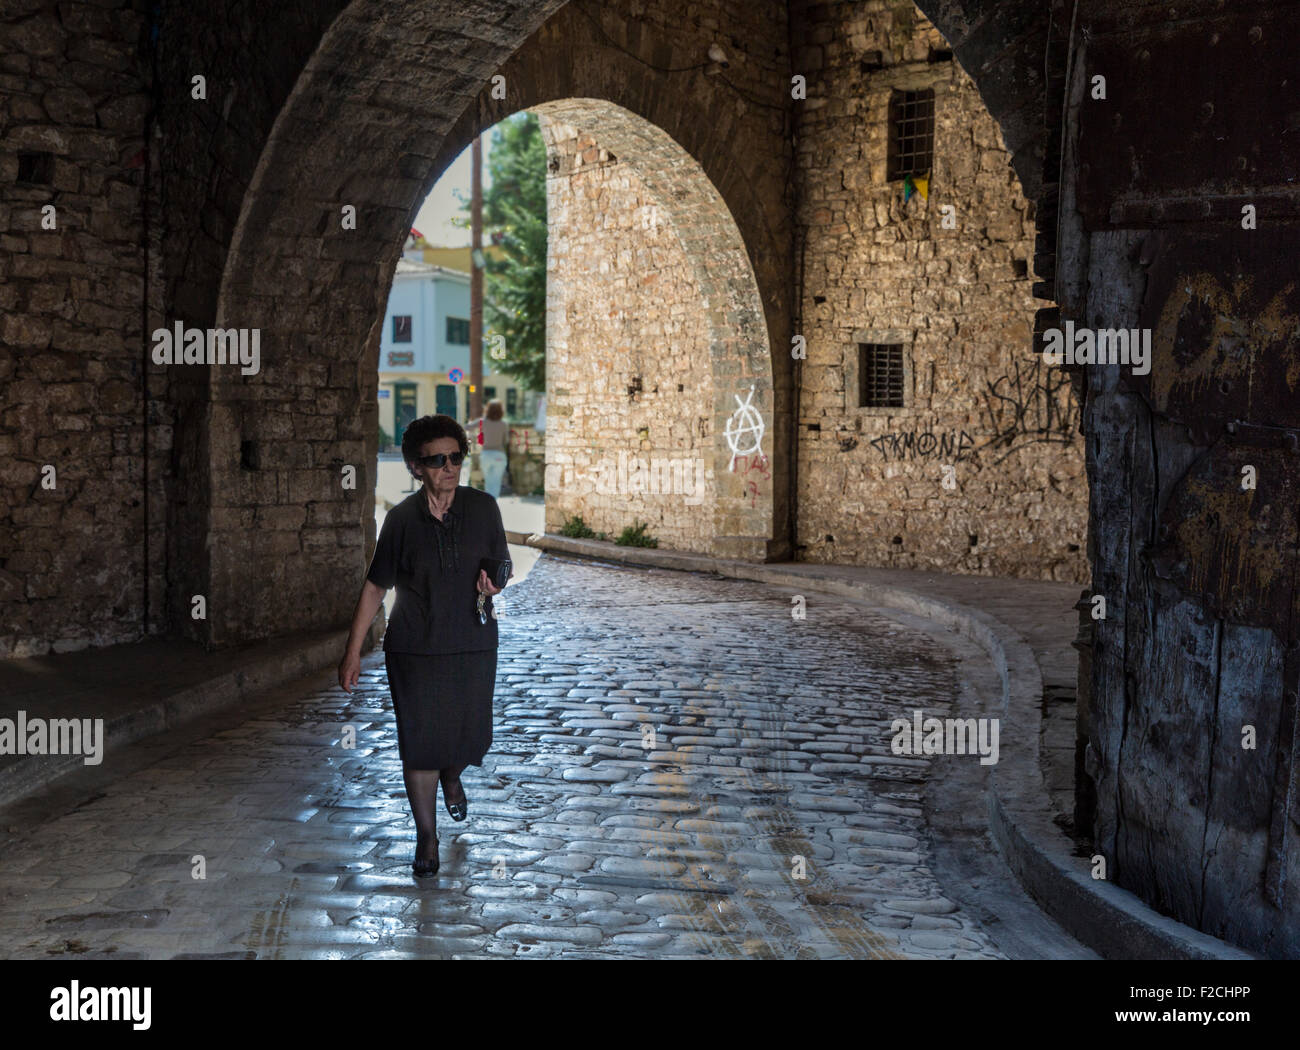 Greek woman in black dress exiting the old city of Ioannina via an arched passageway in the city walls Stock Photo